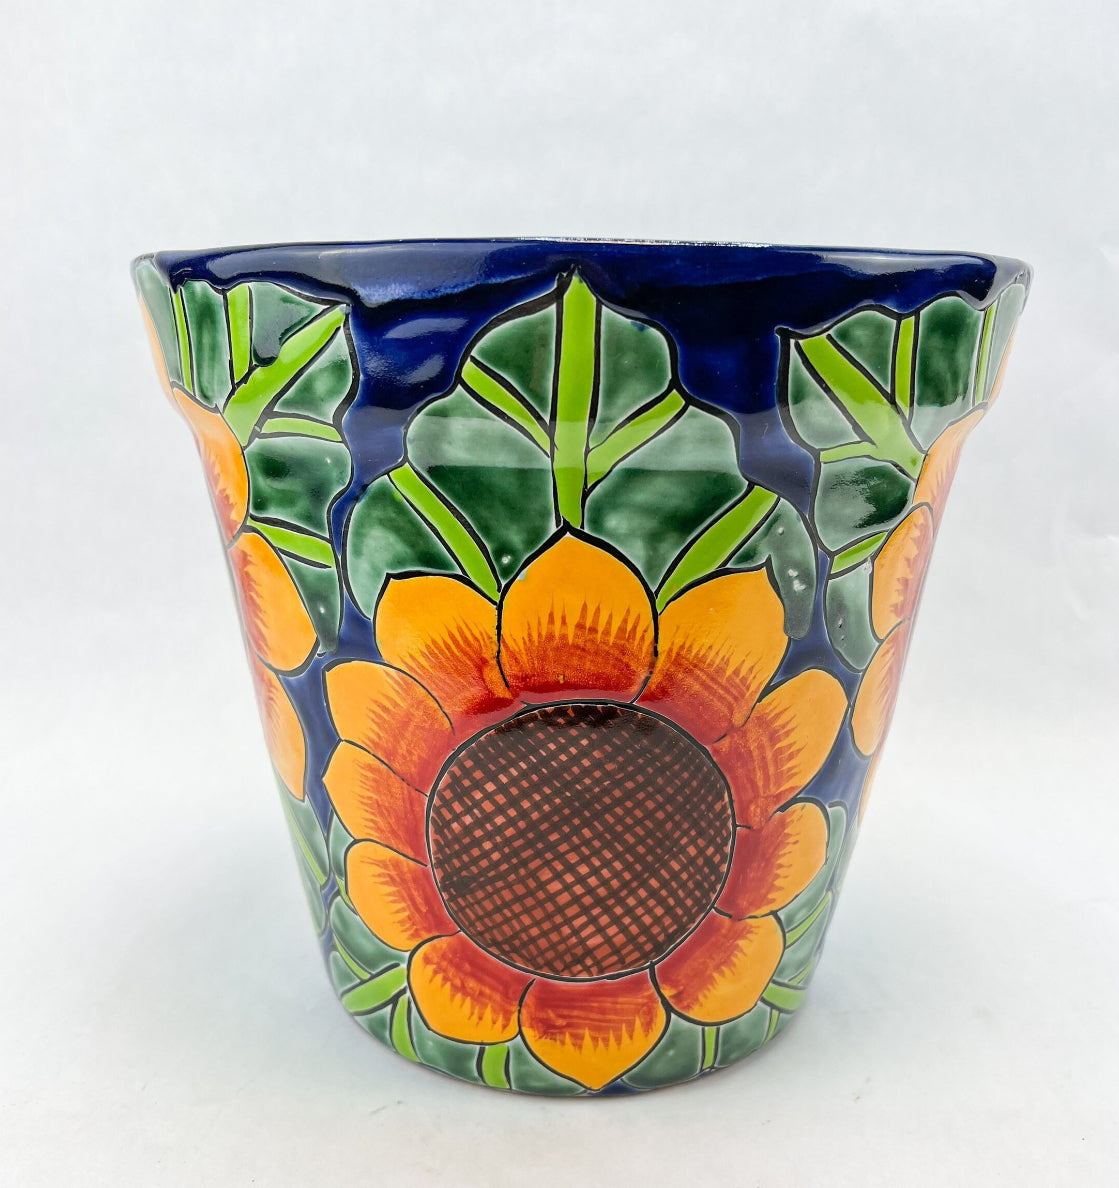 Hand-painted Talavera flower pot featuring vibrant floral design, part of authentic Mexican pottery collection. Talavera planters showcase traditional folk art on rustic furniture. Talavera tile adorns walls alongside Talavera animals in rich colors